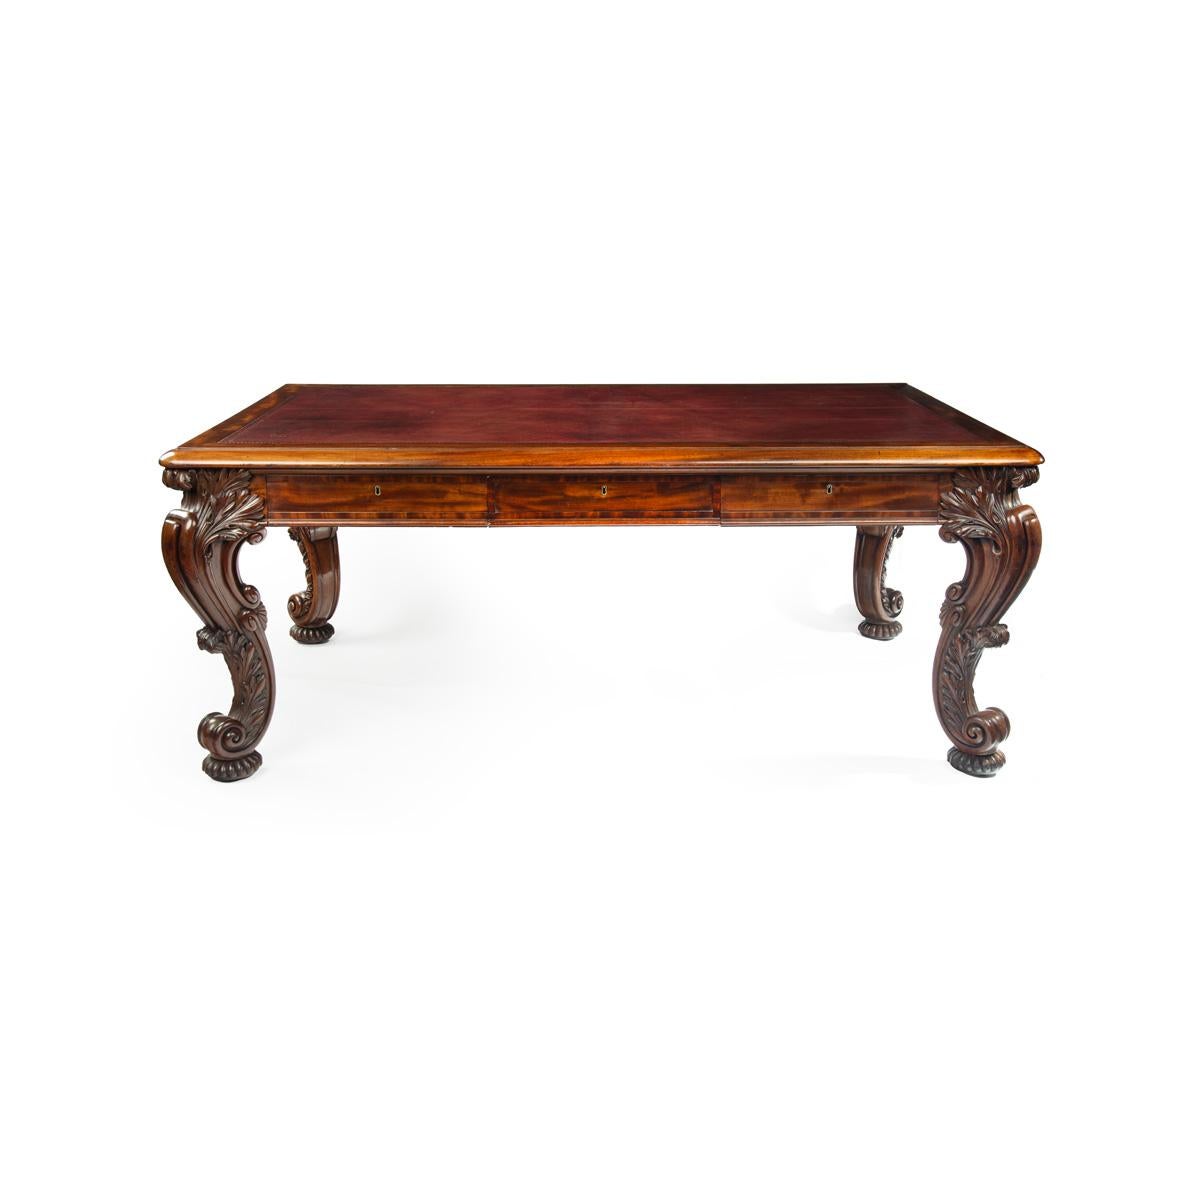 A large late Regency mahogany partner’s library table attributed to Gillows, the leather inset rectangular top above six frieze drawers, the frieze cross banded,  raised on powerful double scroll legs carved with acanthus leaves, the gadrooned pad